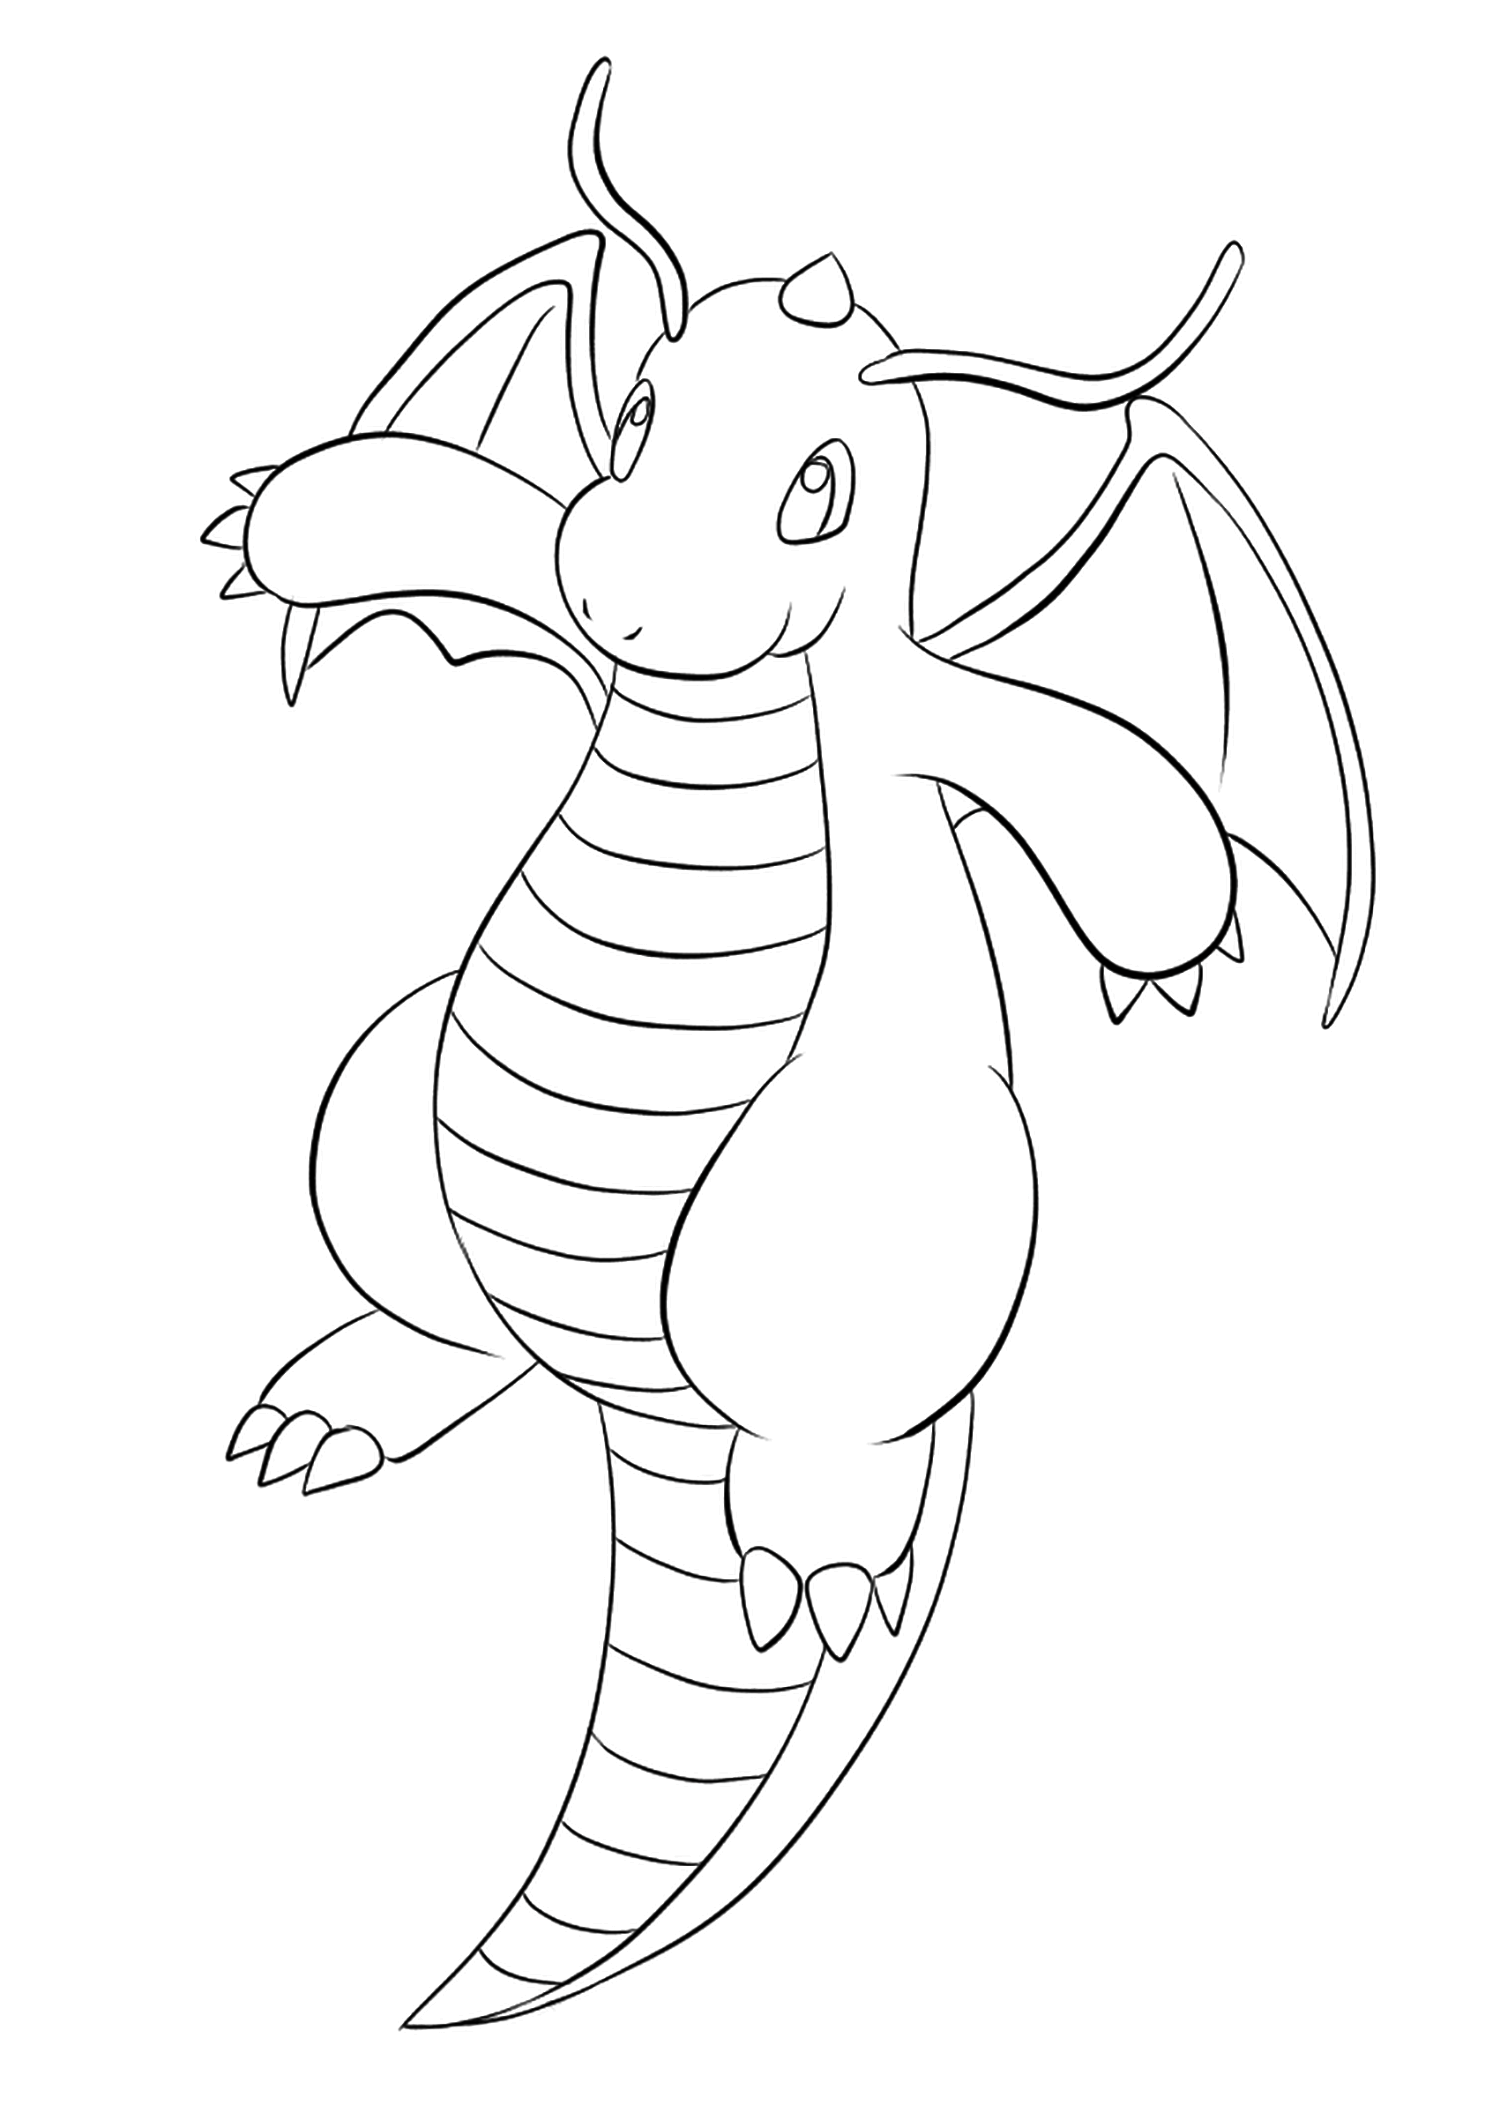 Dragonite No 149 Pokemon Generation I All Pokemon Coloring Pages Kids Coloring Pages